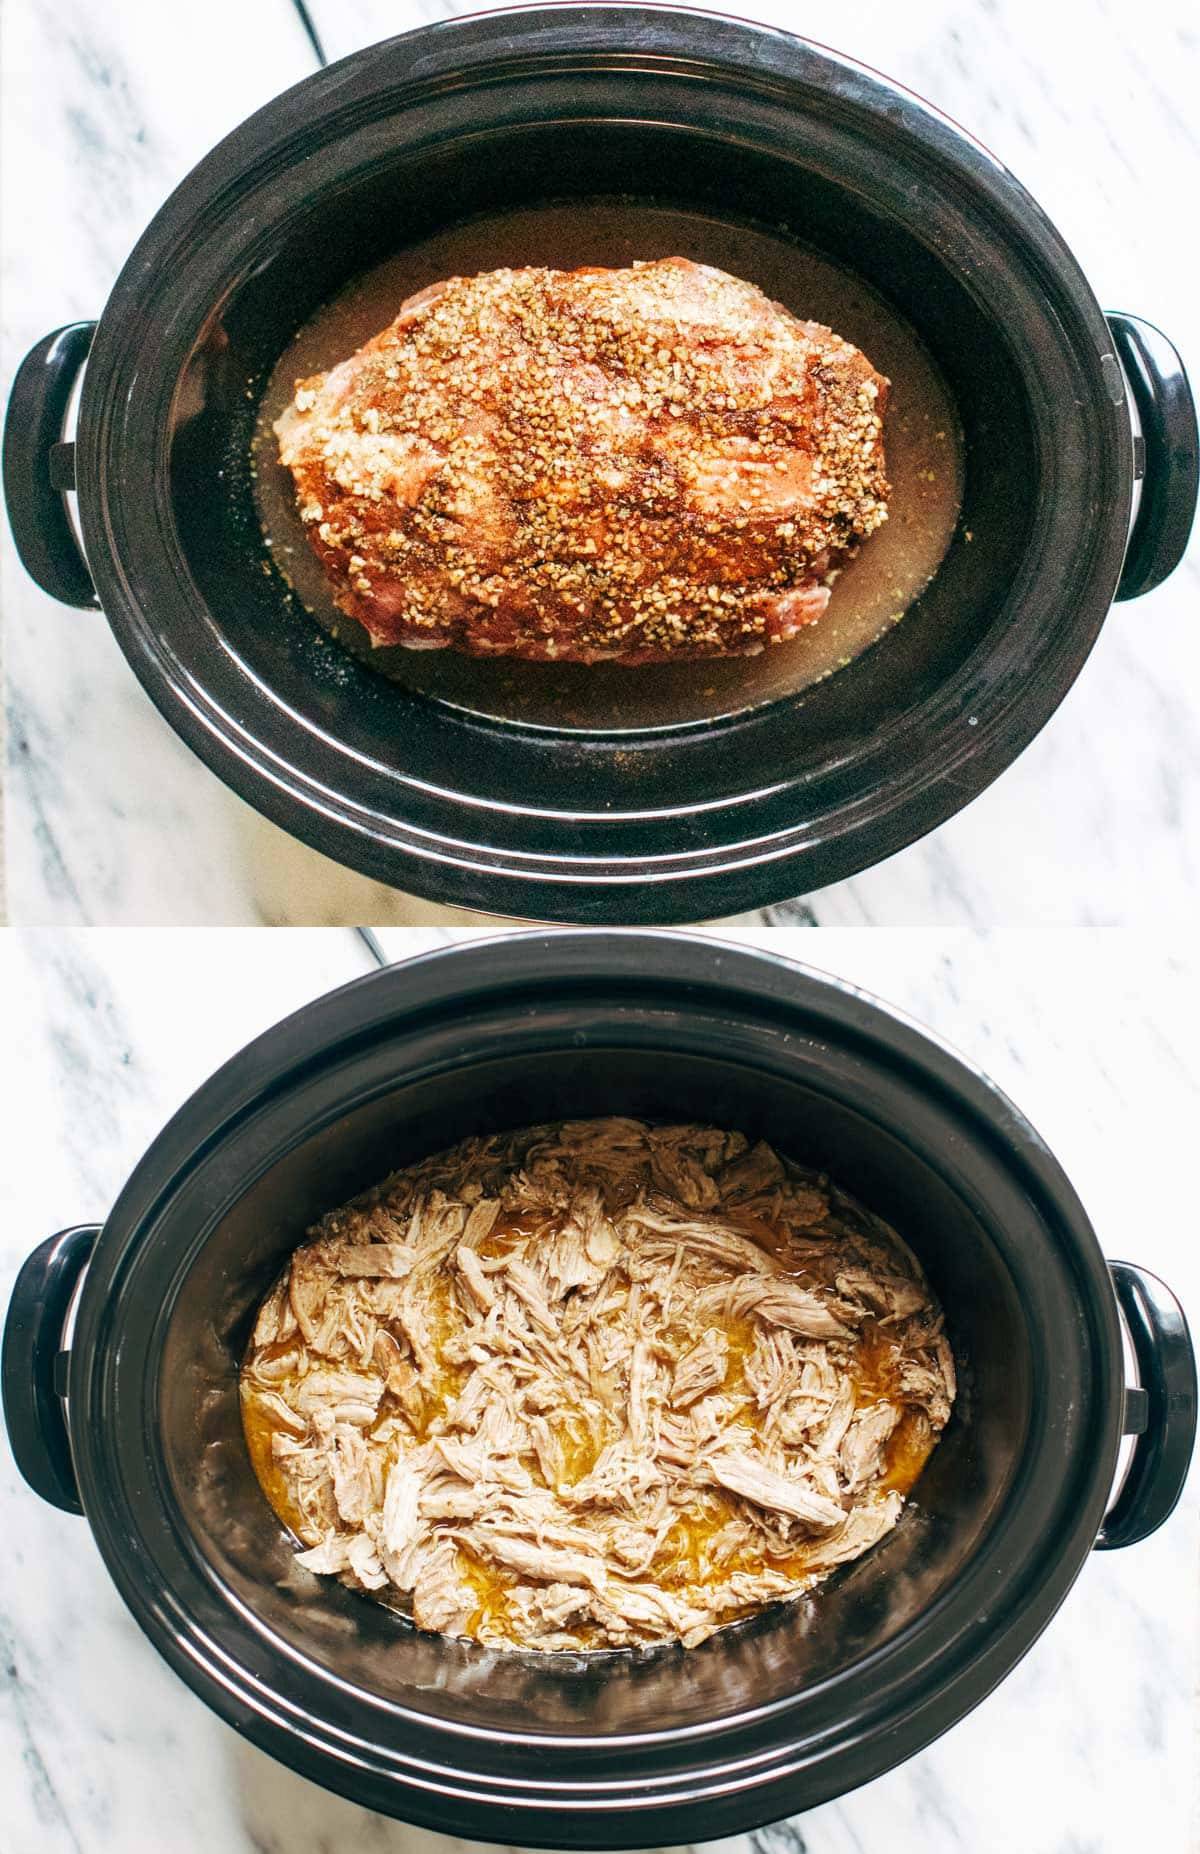 12 SUPER easy recipes you can make in a slow cooker, from veggie lasagna to an entire roasted chicken to pot roast! SO YUM! | pinchofyum.com